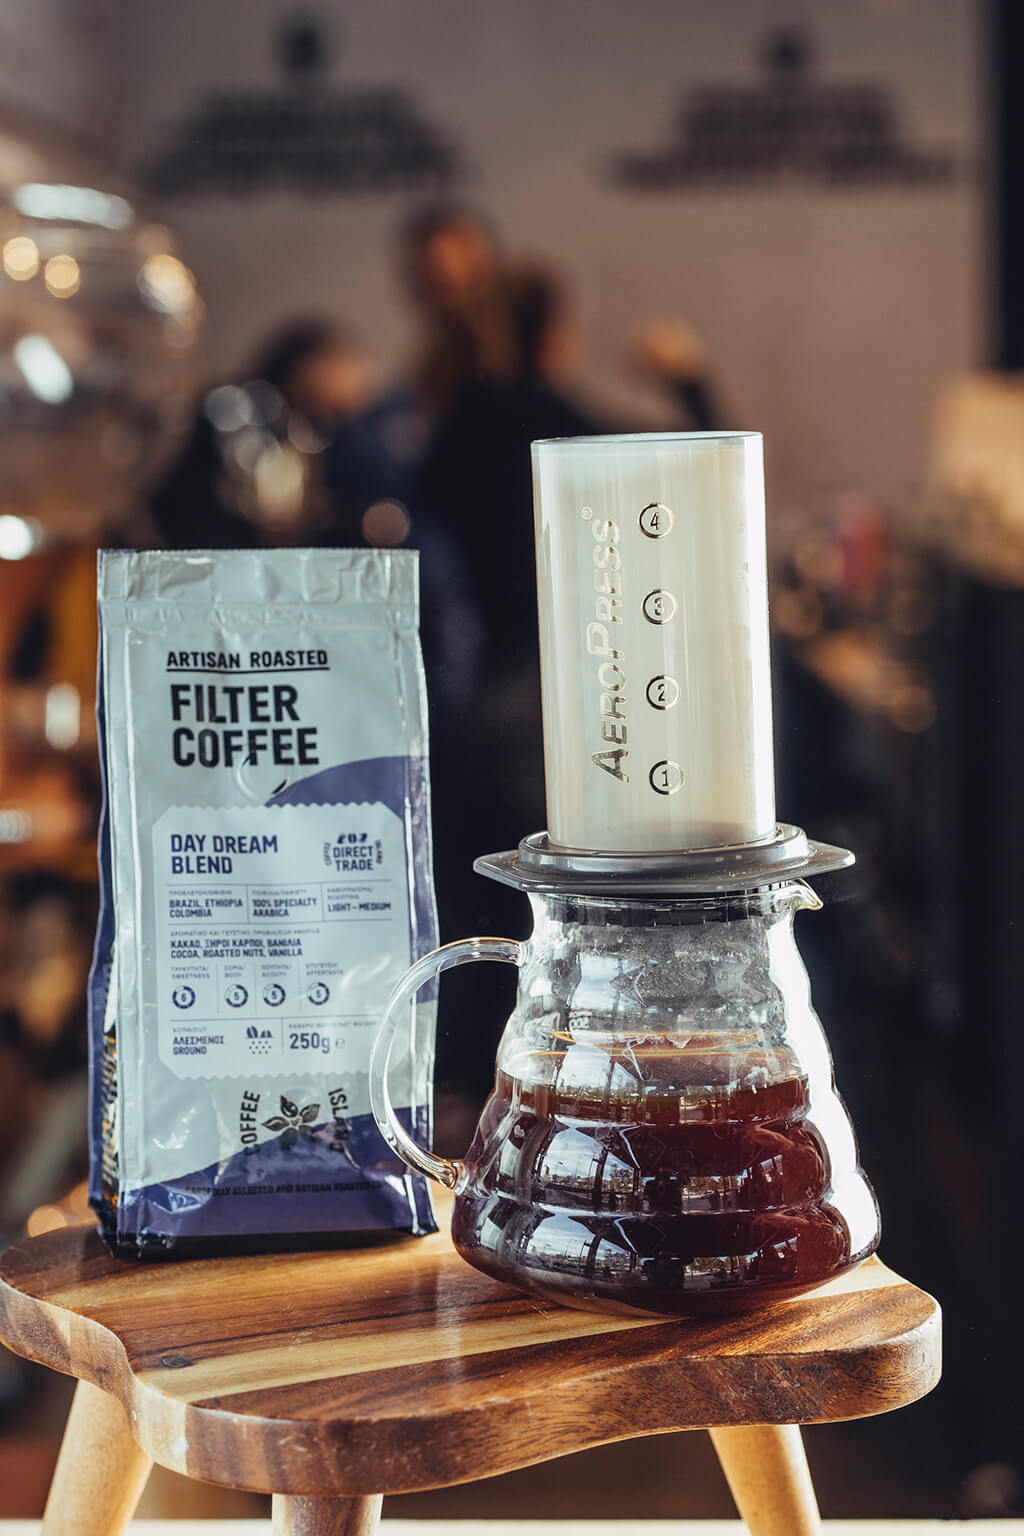 Coffee Island's filter coffee package and aero press